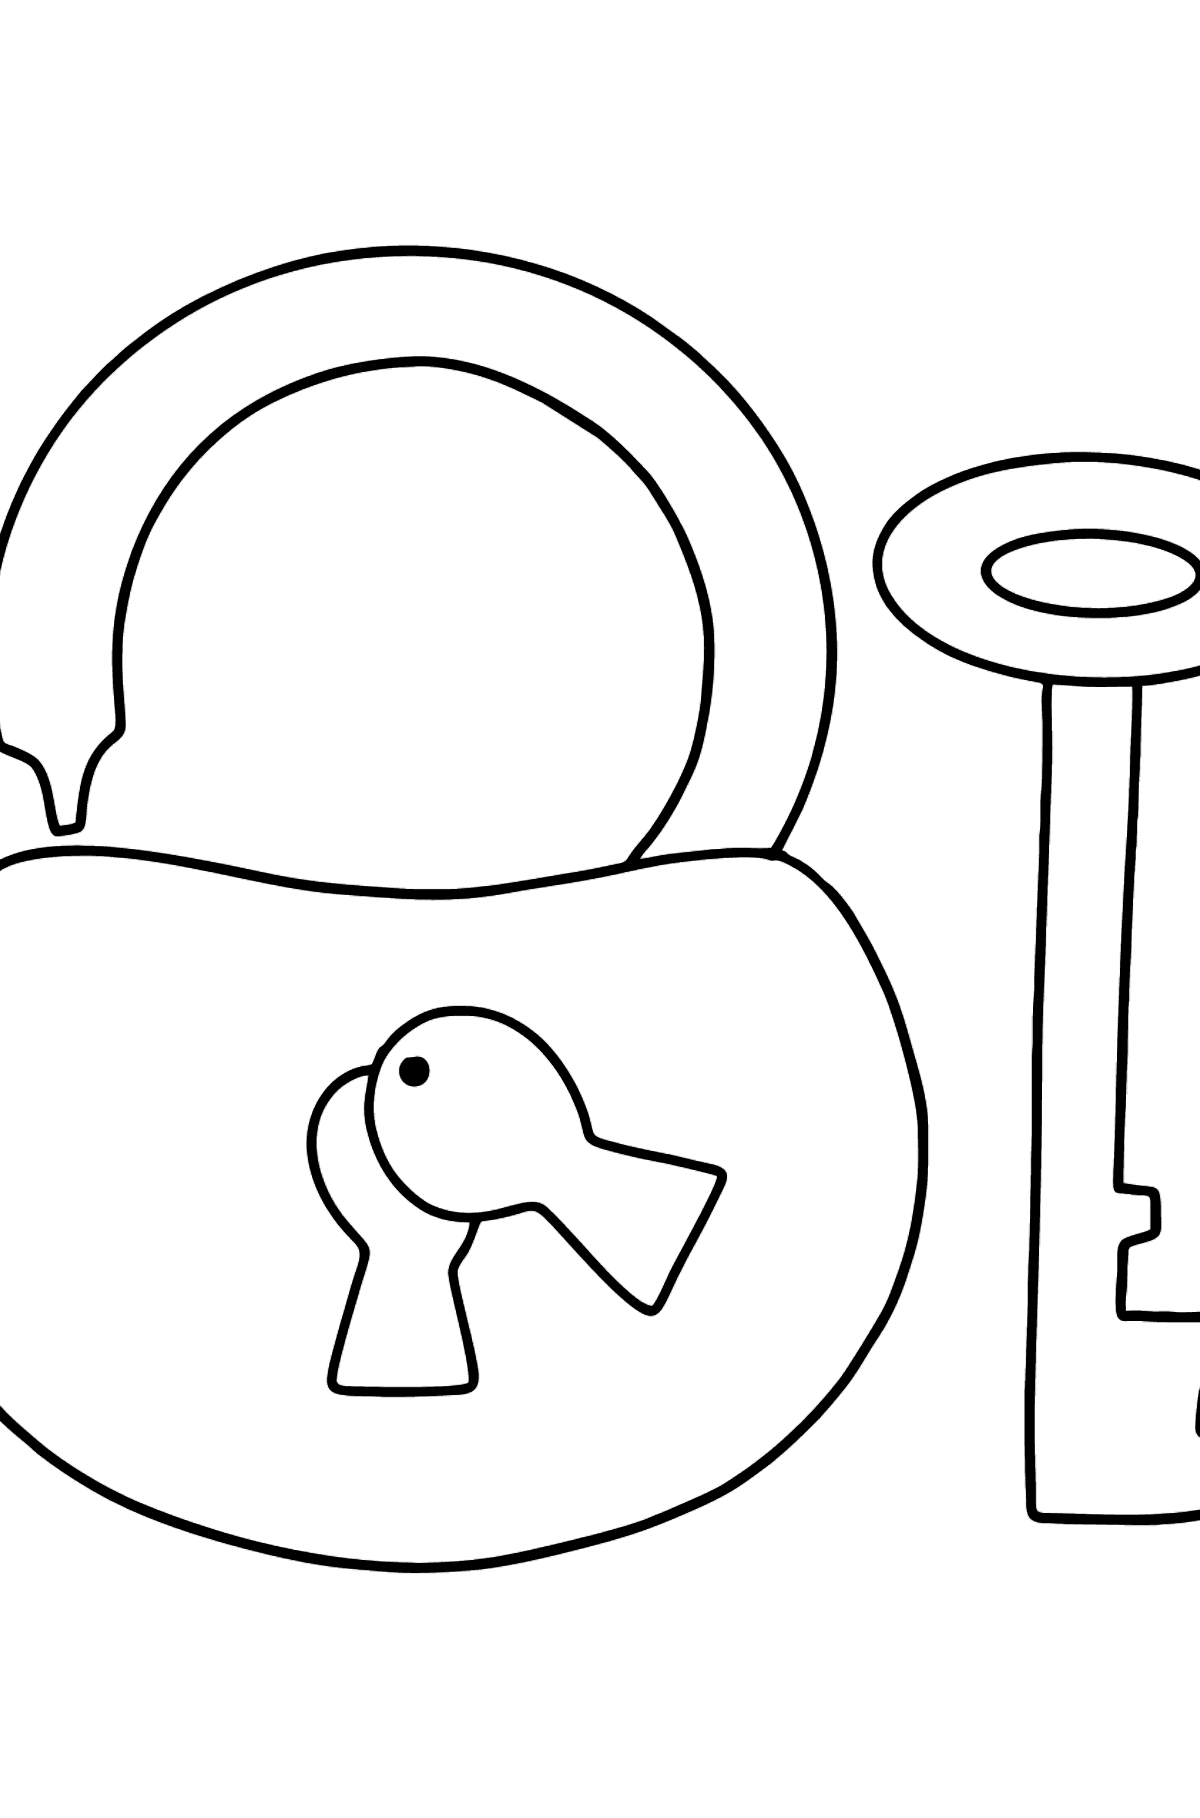 Lock and Key coloring page - Coloring Pages for Kids